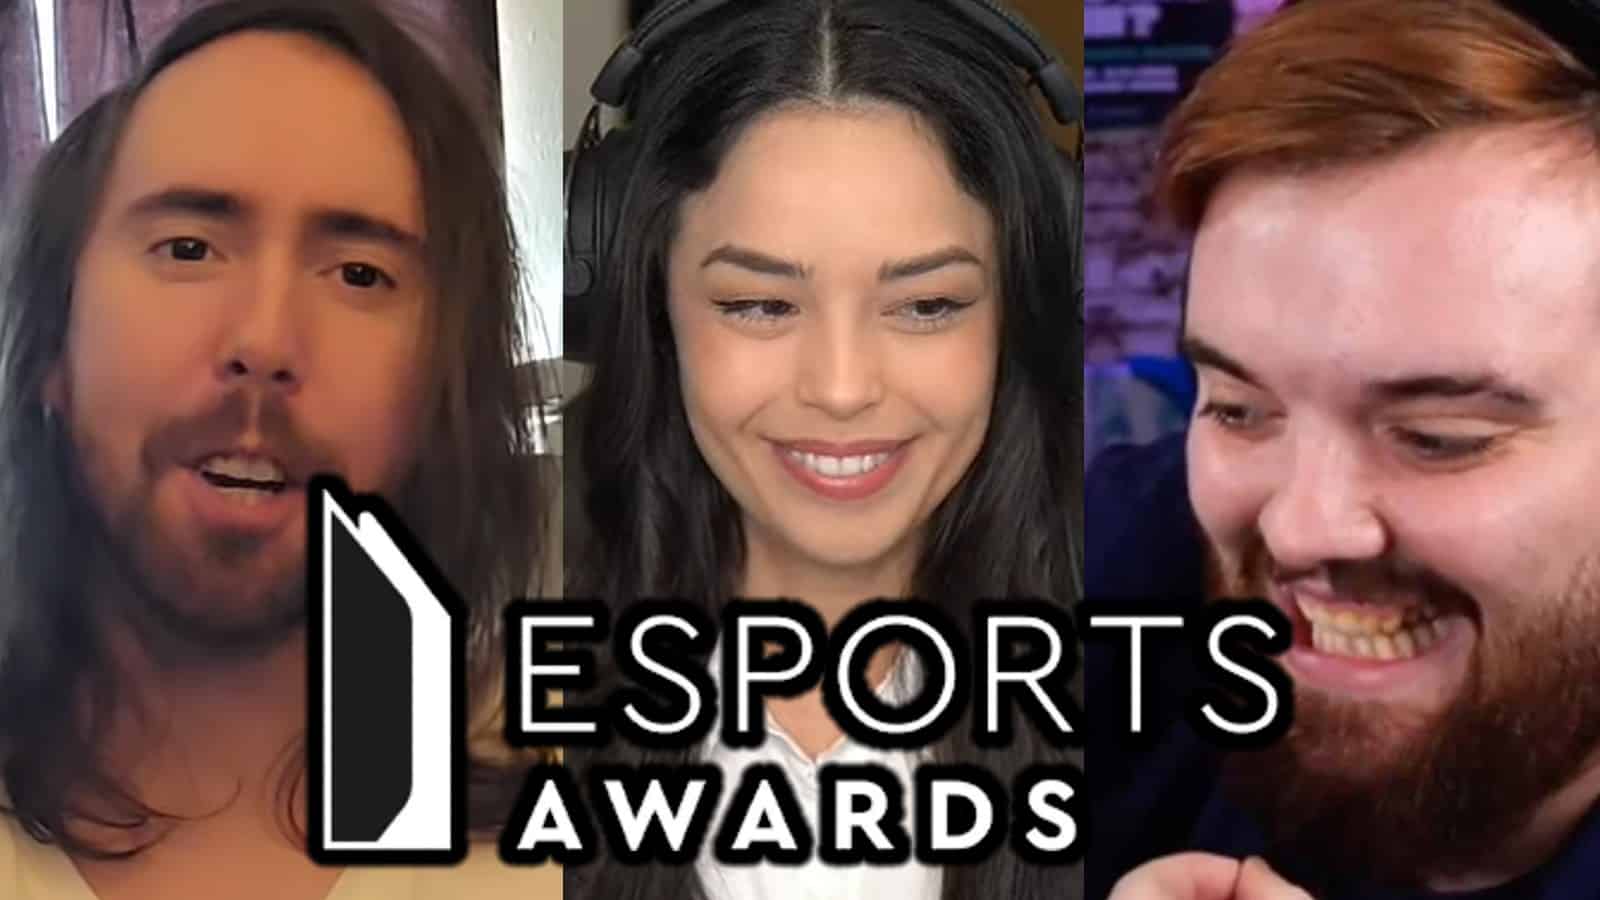 DZ nominated for the Video Game Awards as the best esports team in